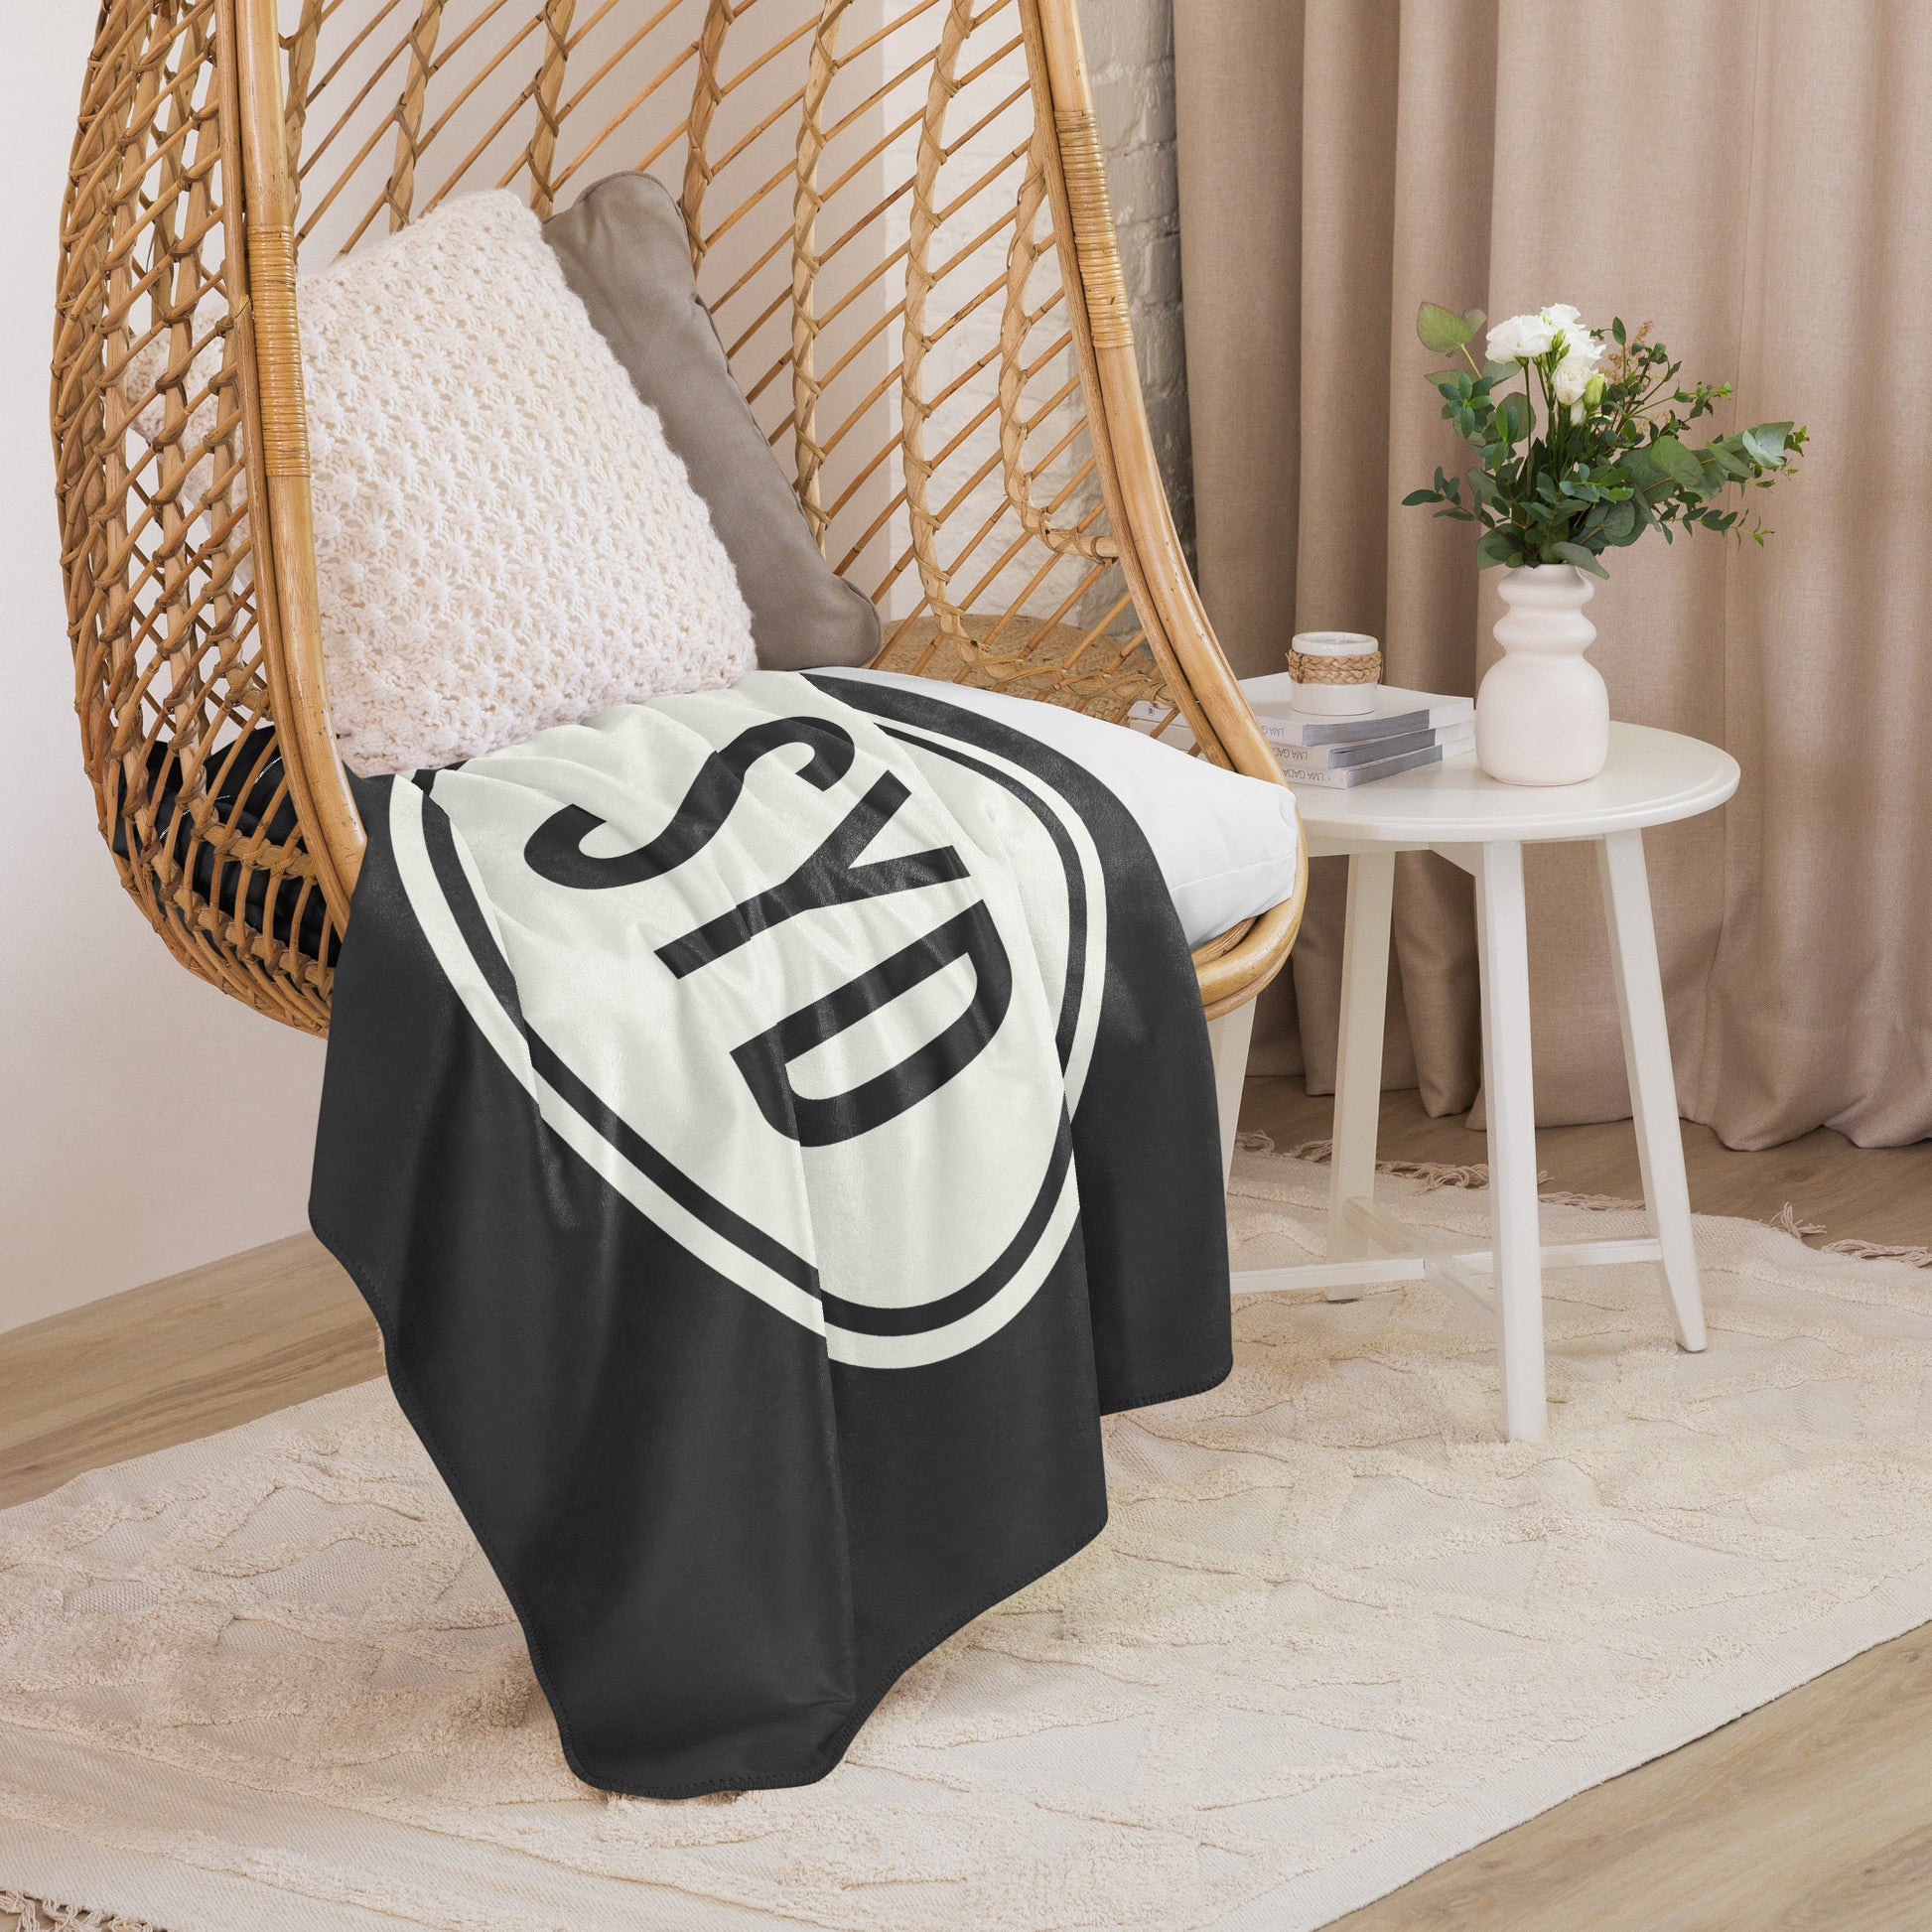 Unique Travel Gift Sherpa Blanket - White Oval • SYD Sydney • YHM Designs - Image 06